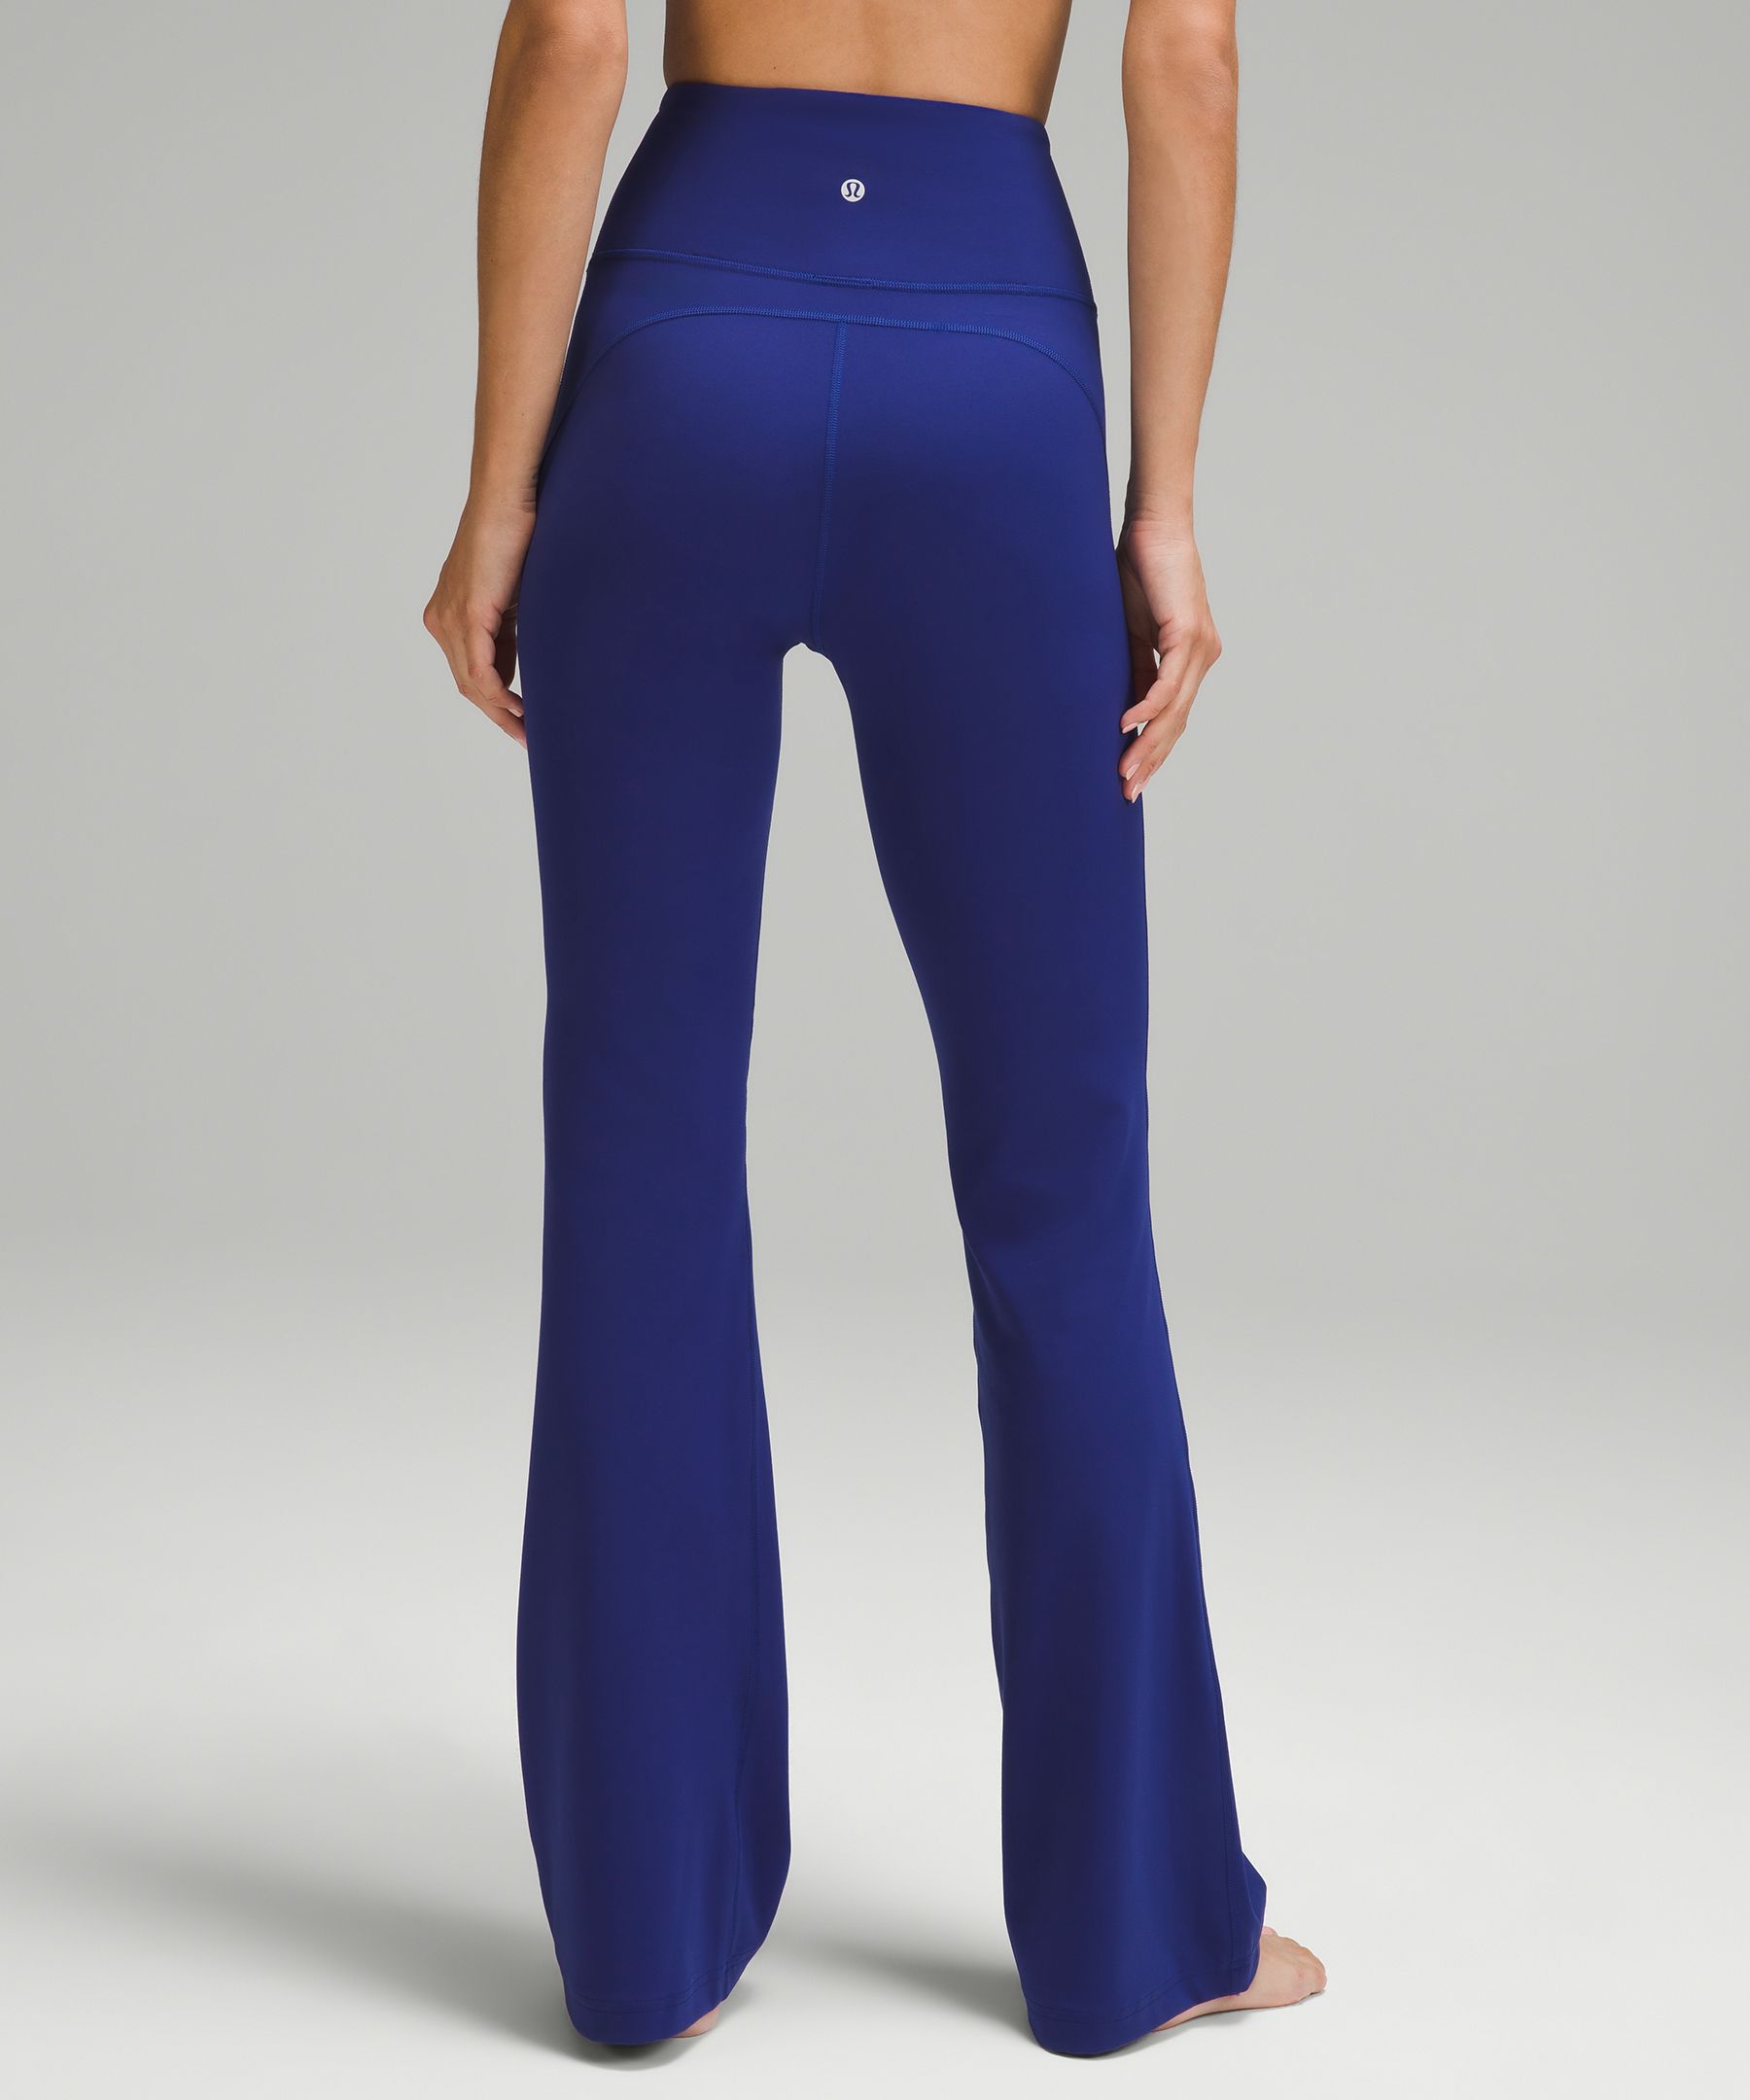 ✌️these groove super high waist flares are taking me into spring 🌿☀️  (color is wild indigo!) 🤍🦋✨ : r/lululemon